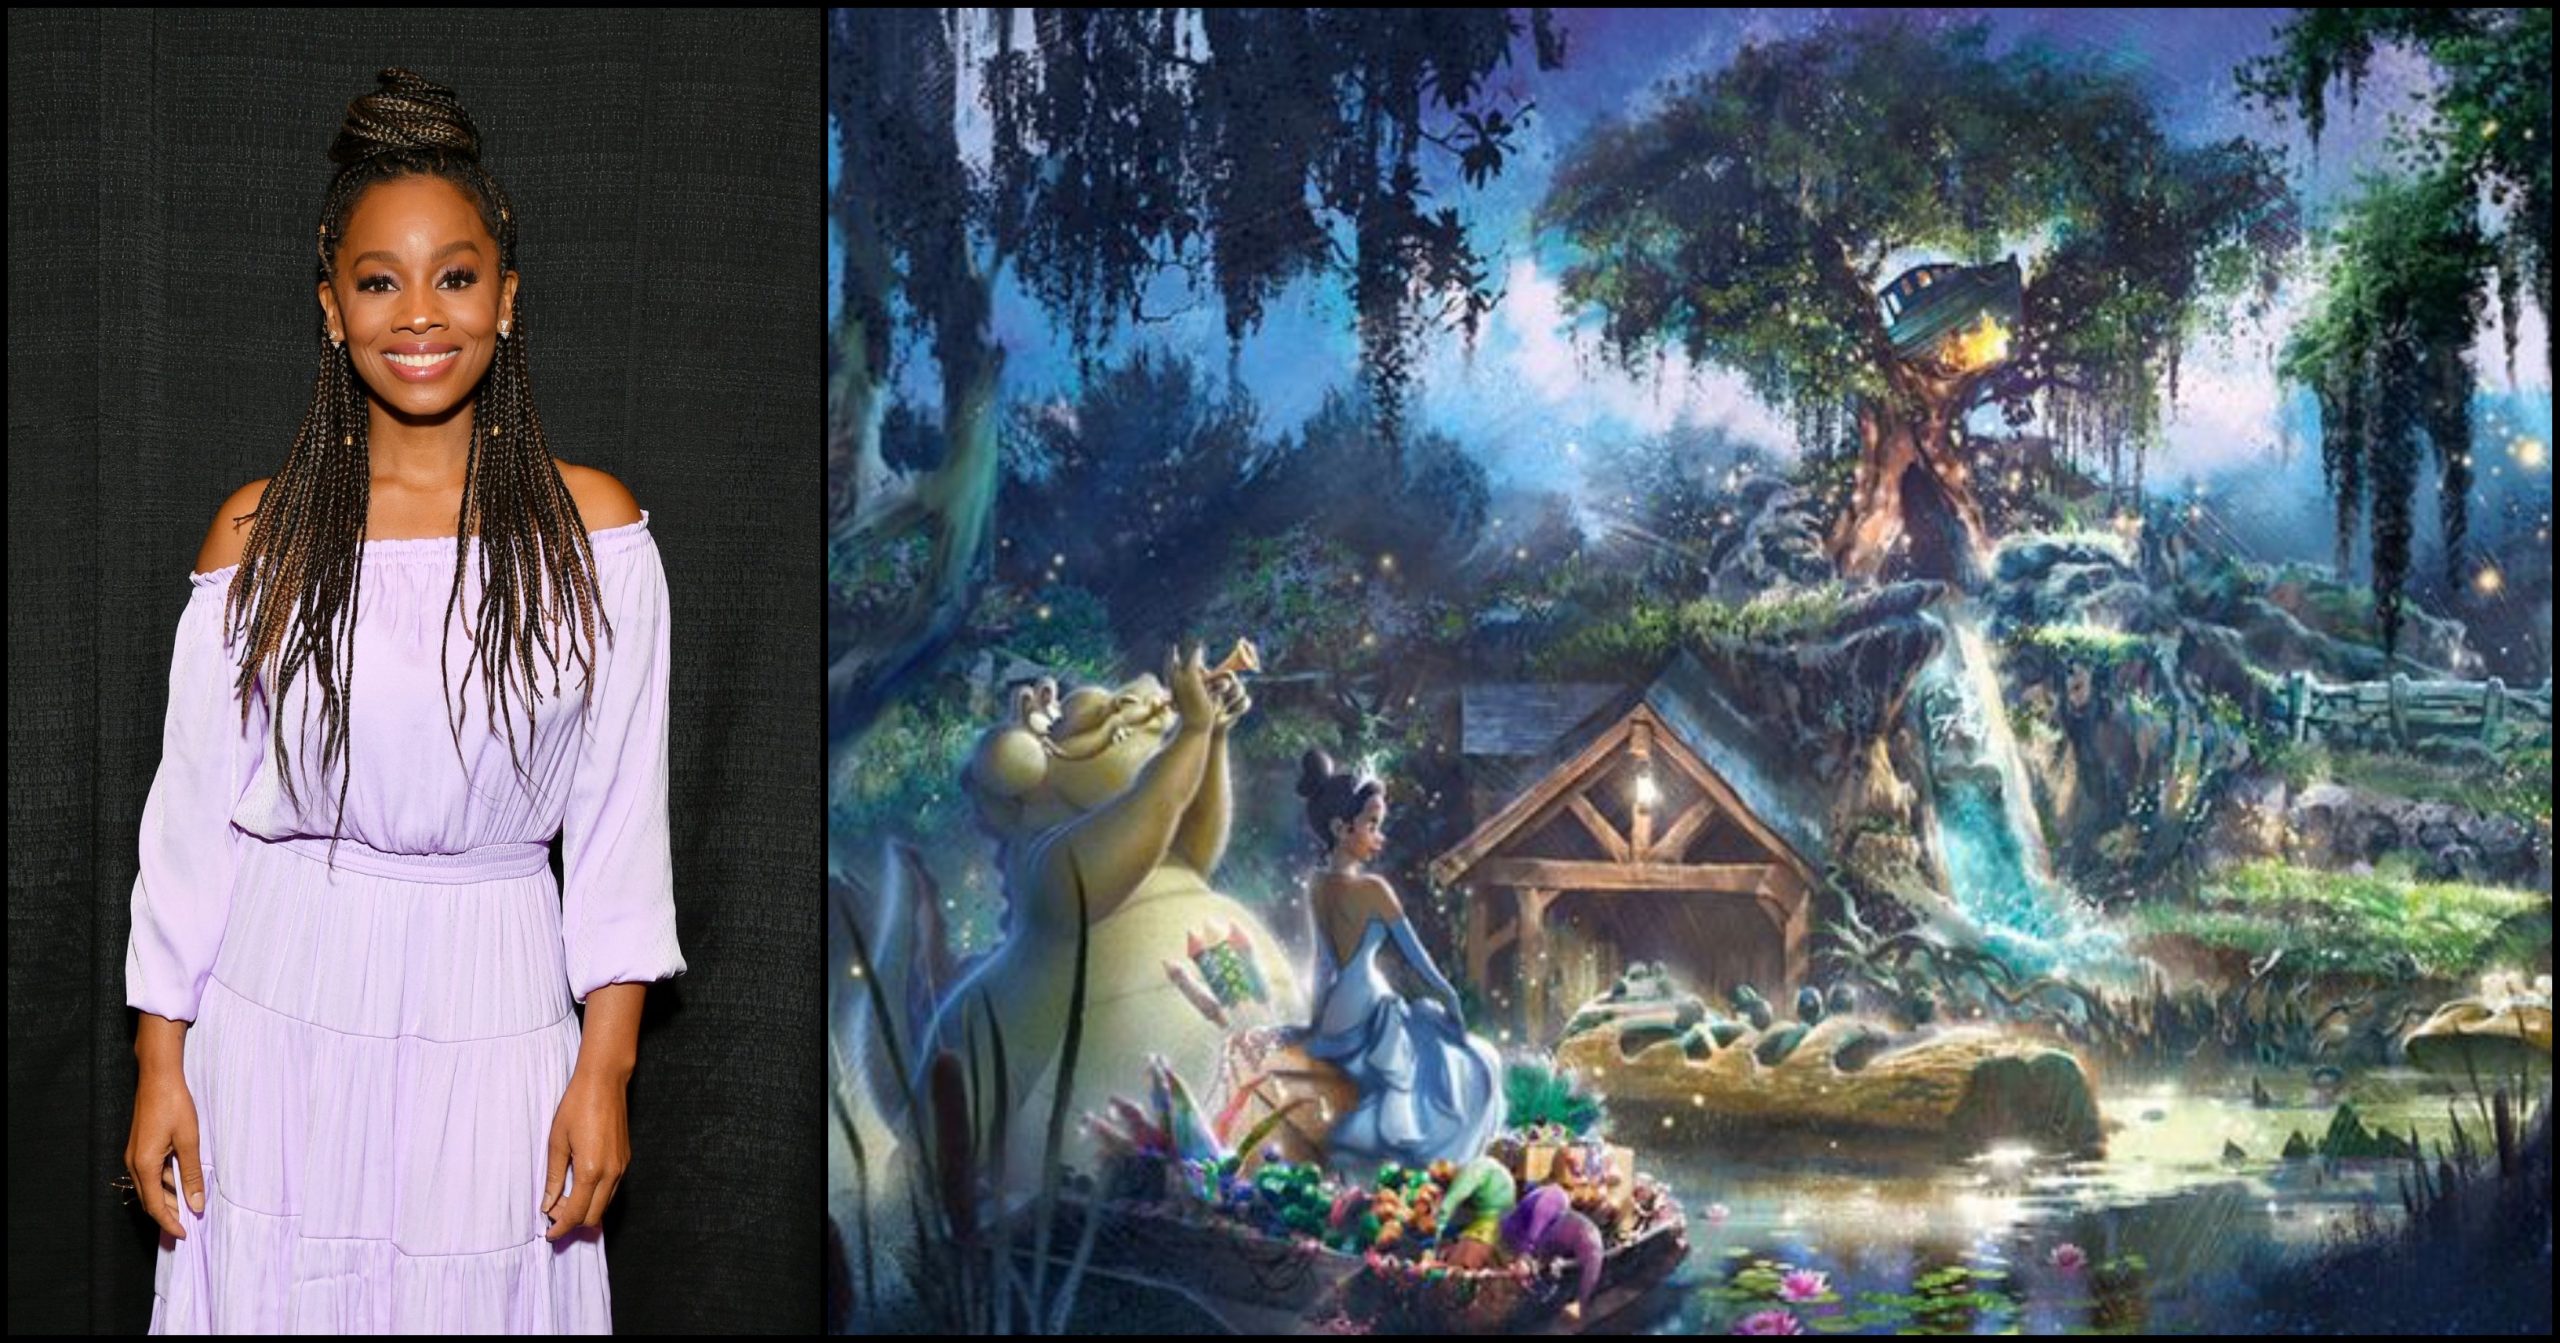 Anika Noni Rose Shares New Details About the ‘The Princess and the Frog’ Re-Theming of Splash Mountain